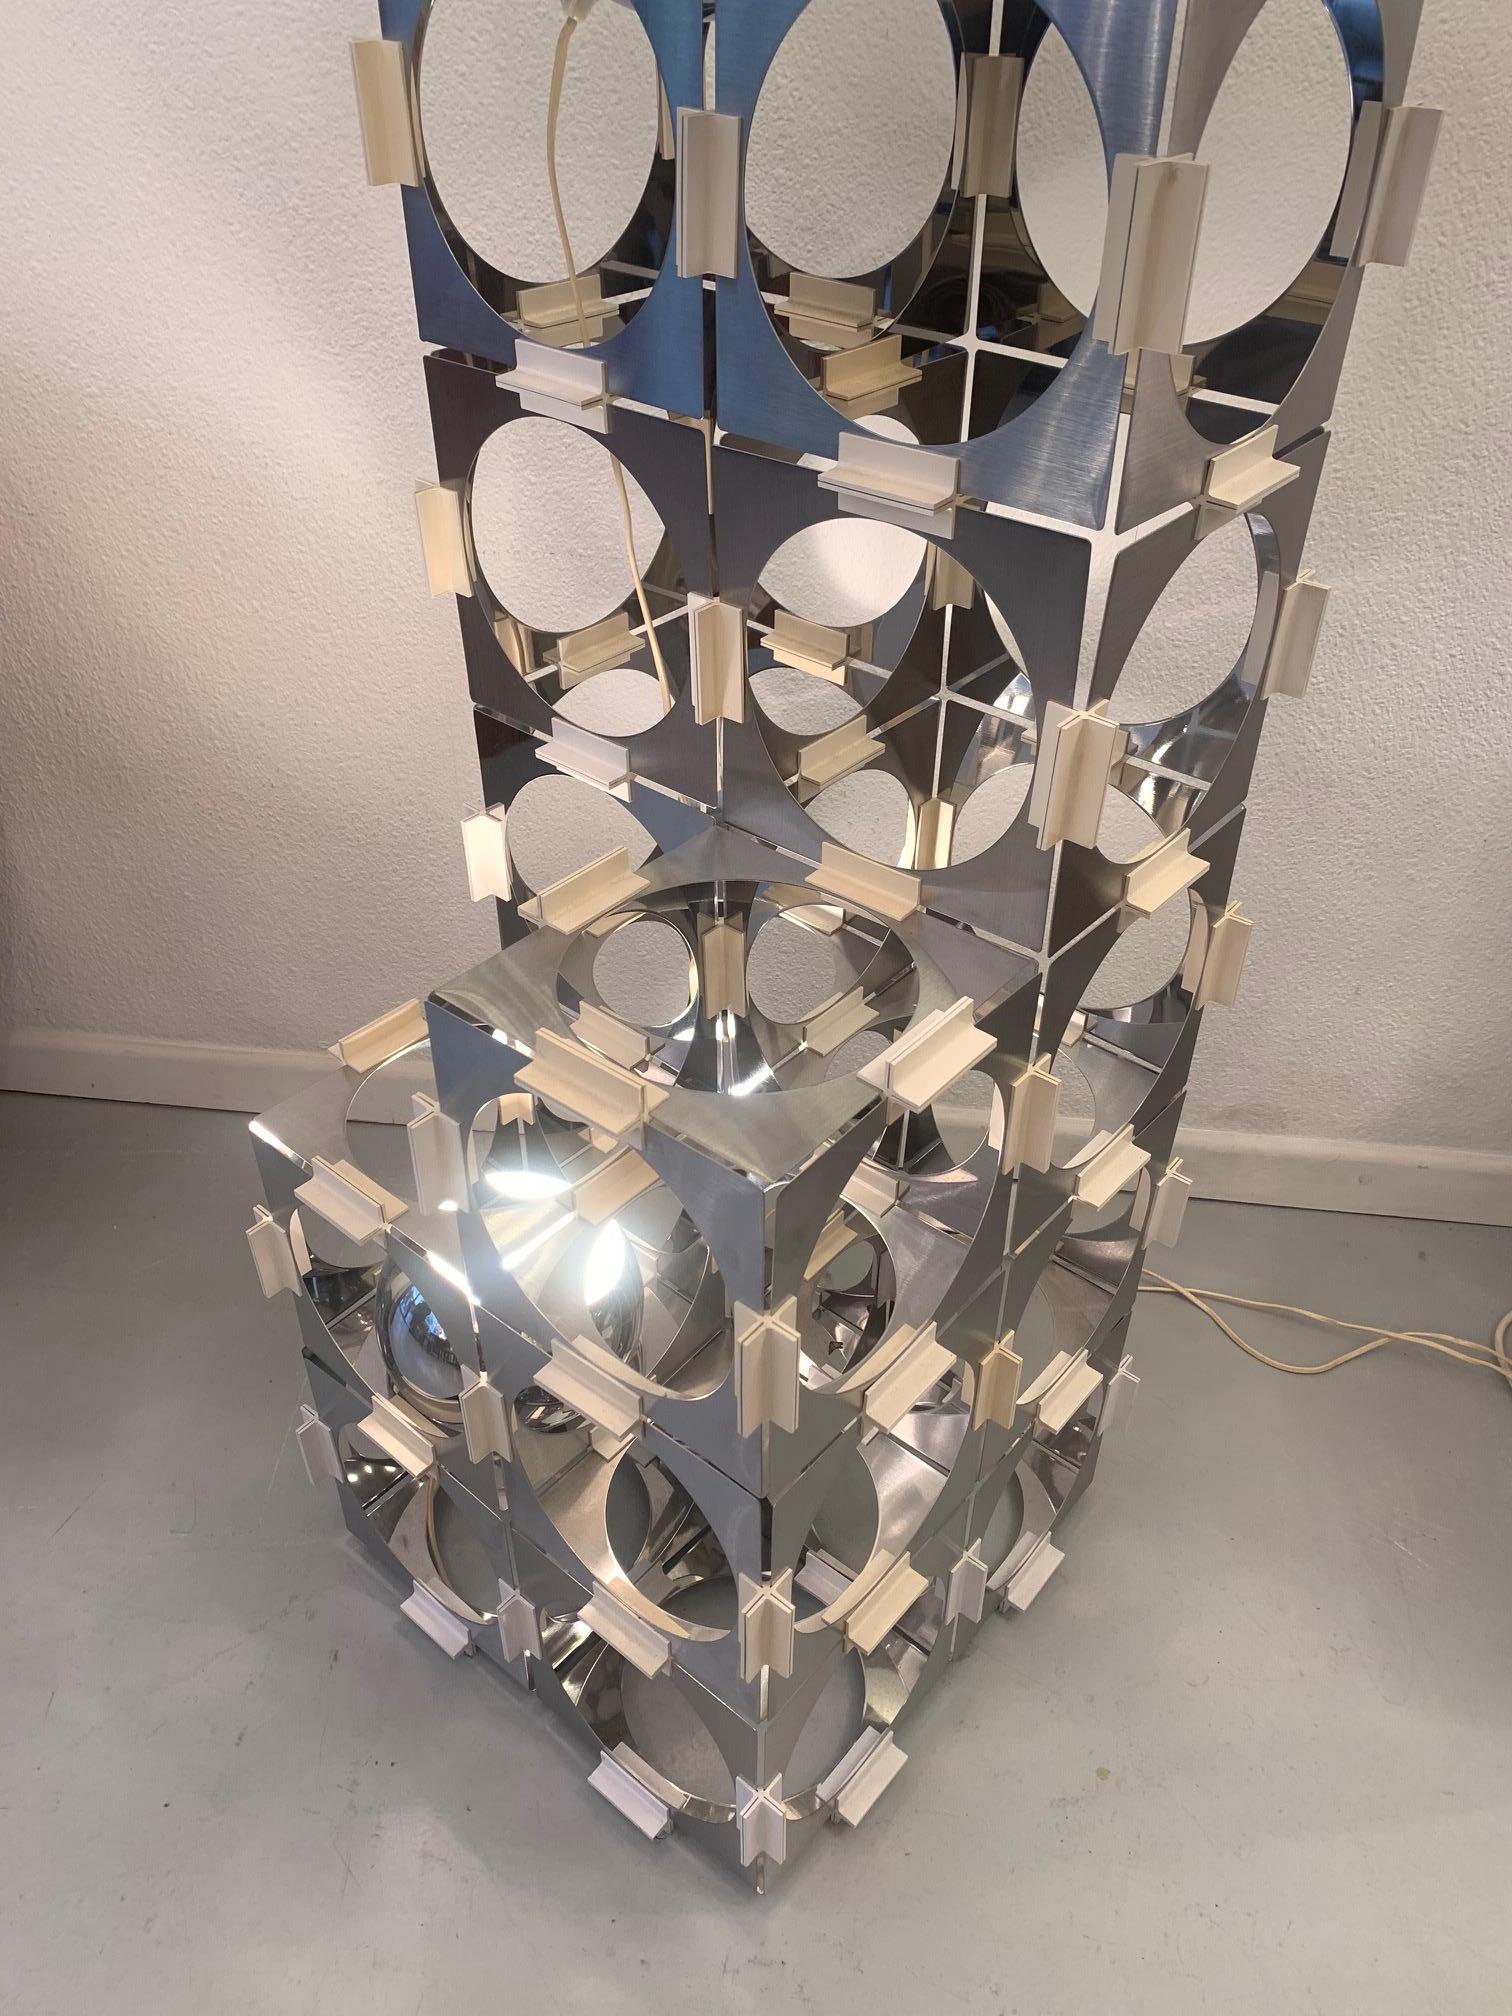 Rare Stainless Steel Skyscraper Modular Floor Lamp by Reggiani, Italy, ca. 1970s For Sale 1